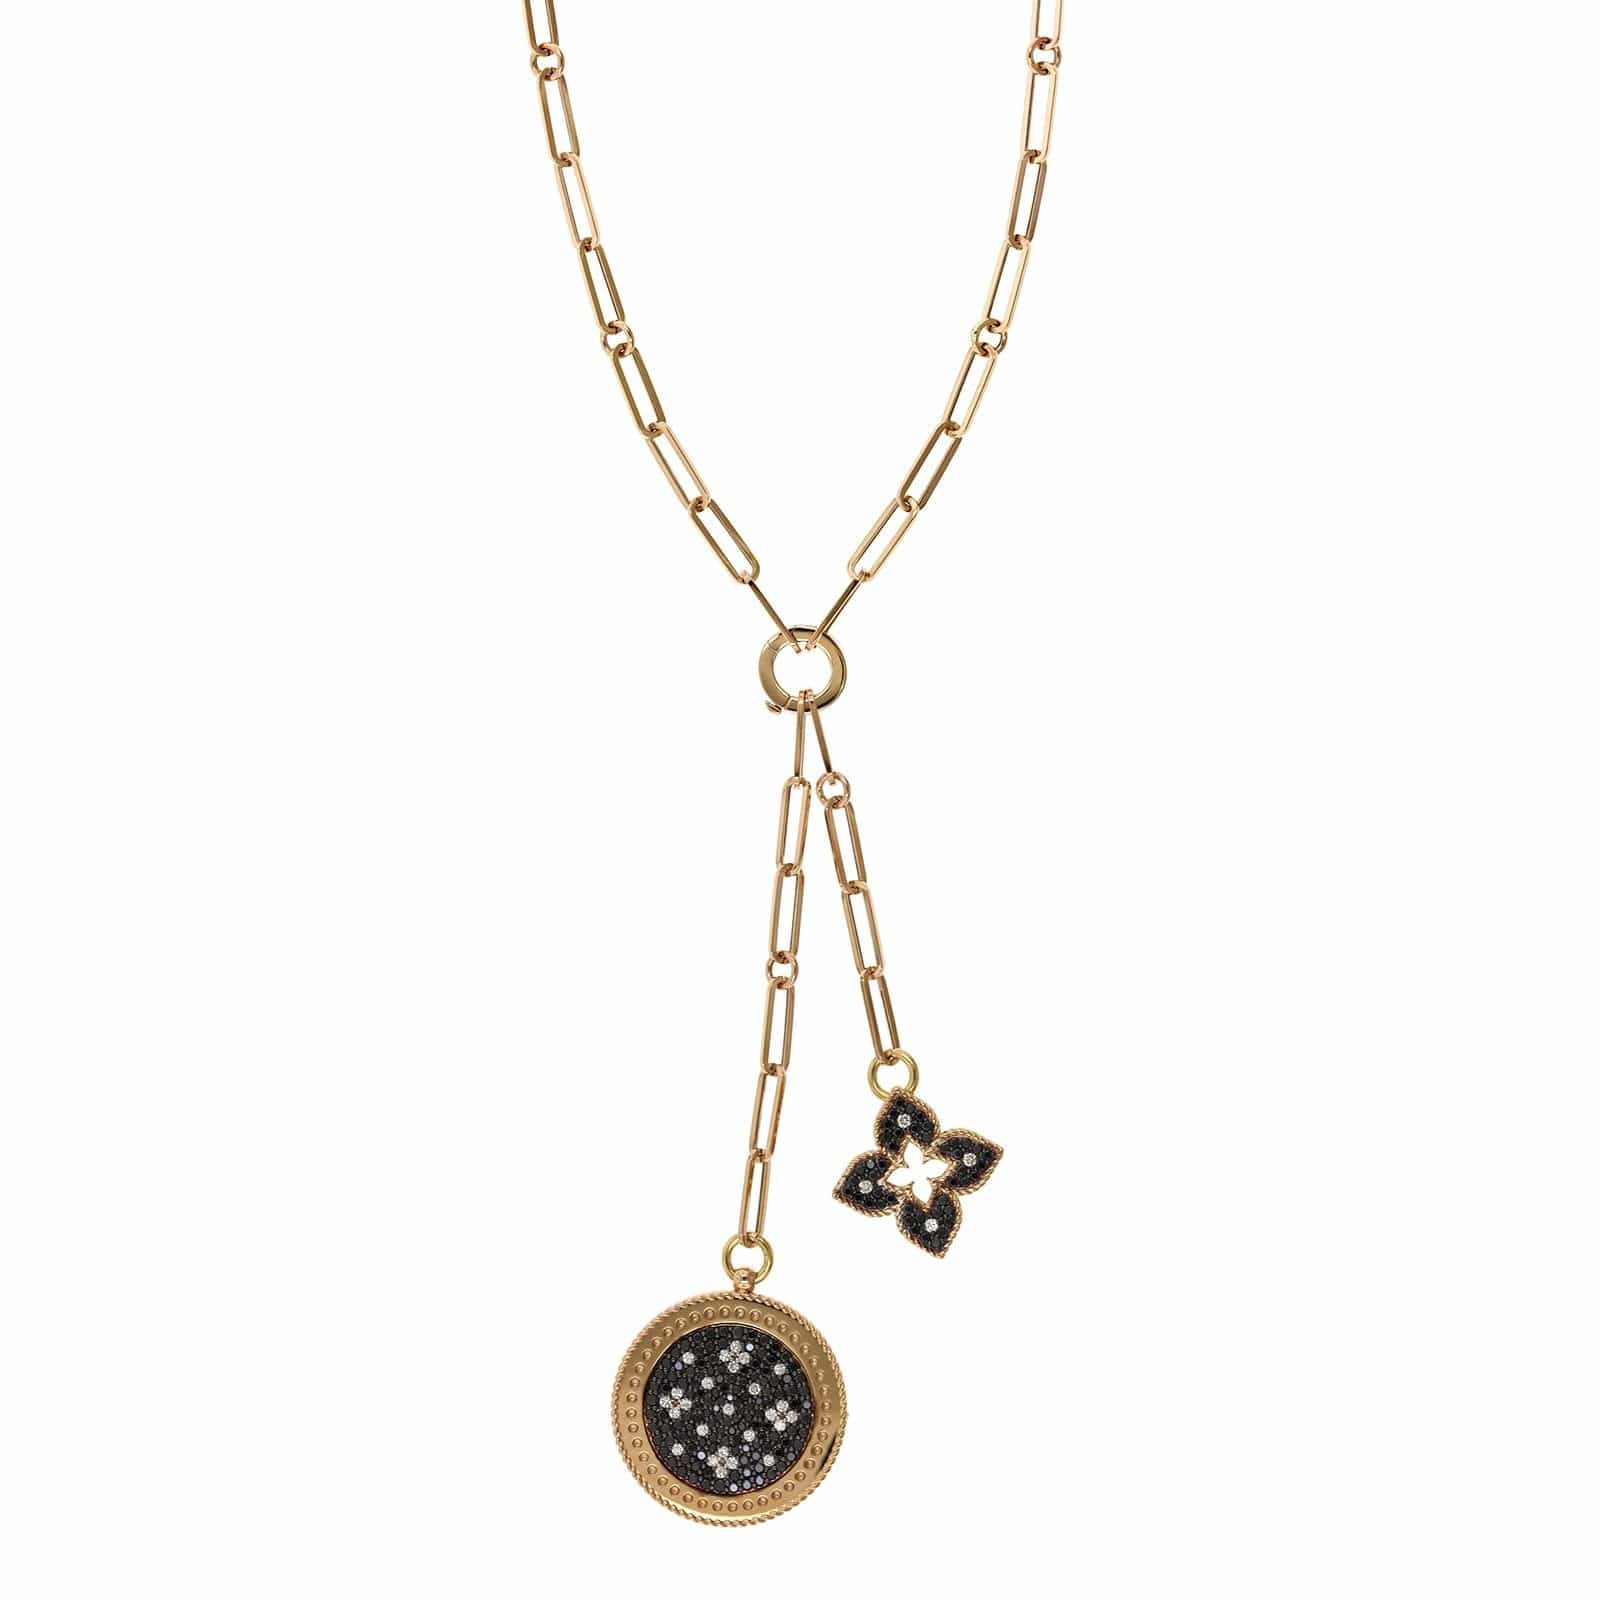 Gold LV Coin Necklace